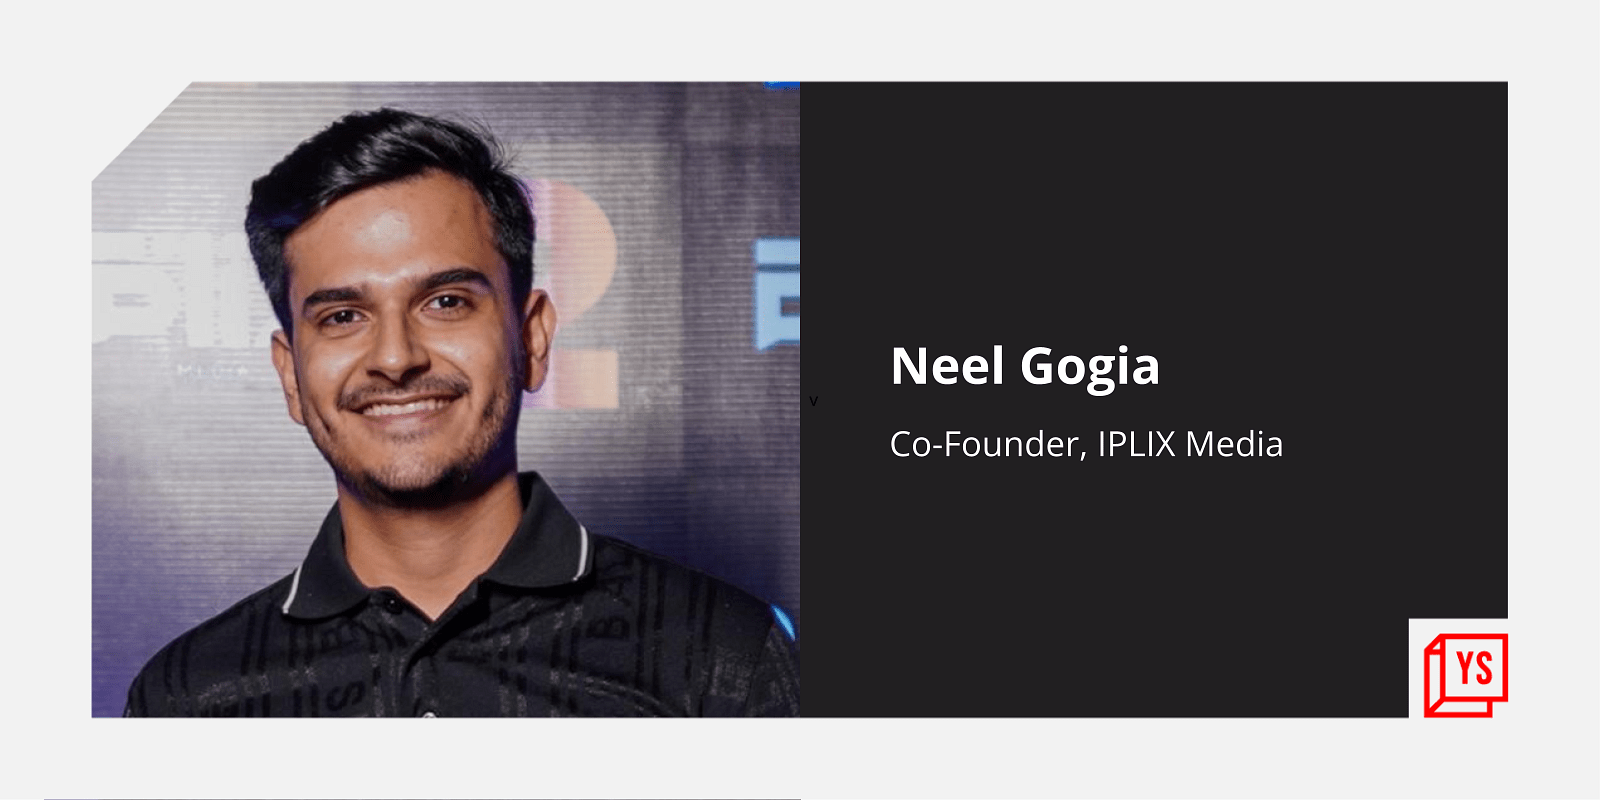 You are currently viewing Straight out of college, this entrepreneur found his niche in connecting India’s top influencers and brands